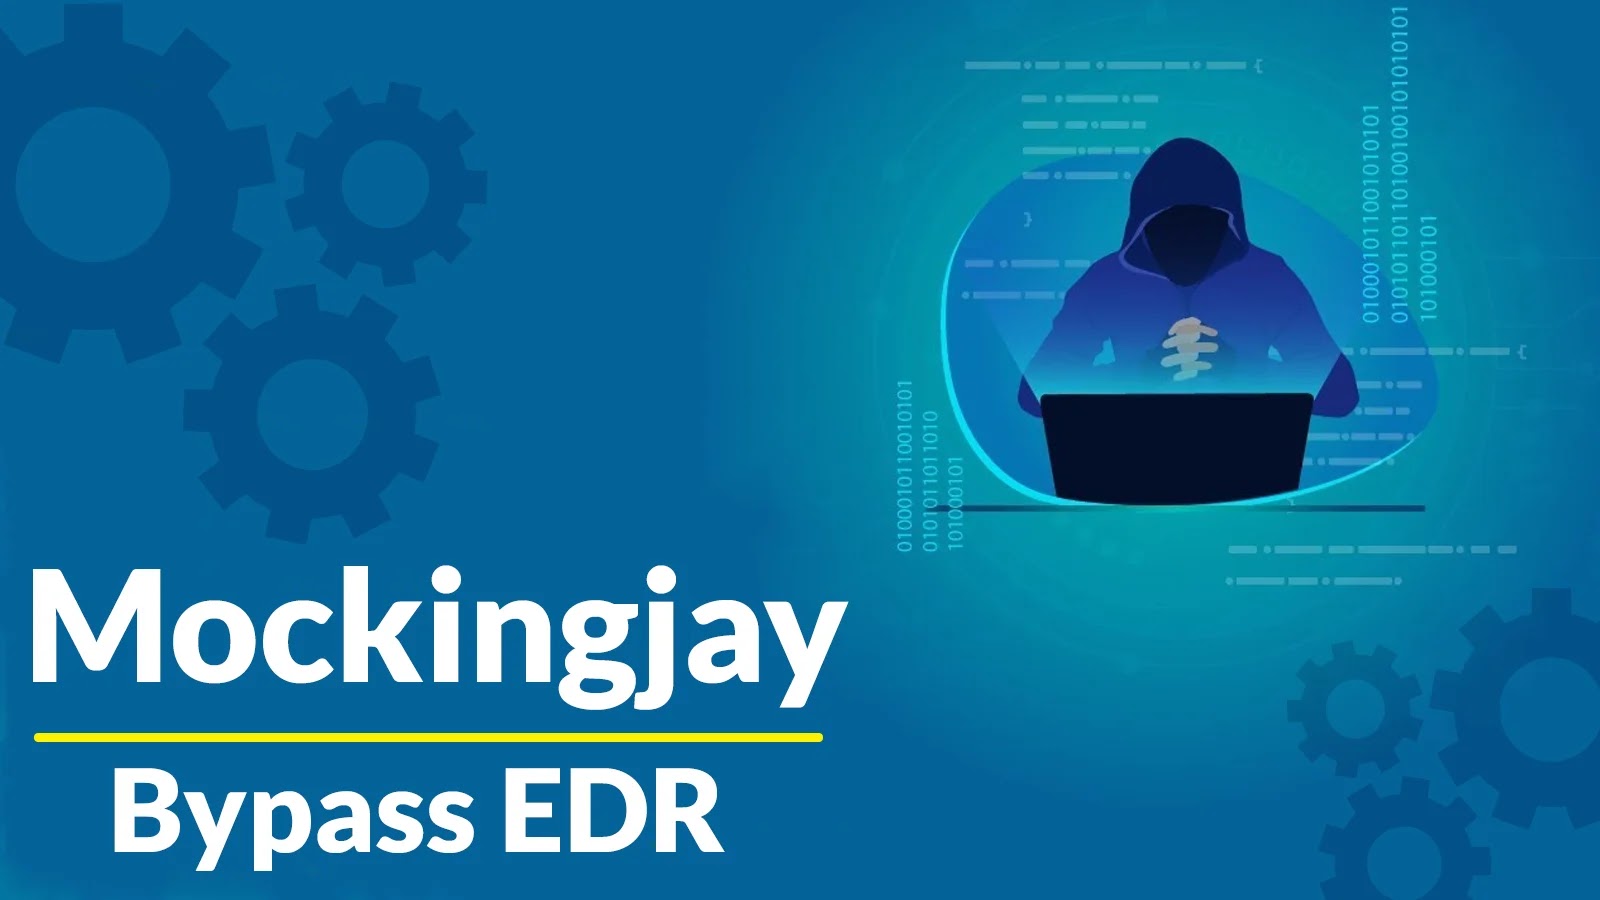 Mockingjay process injection technique allows EDR bypass